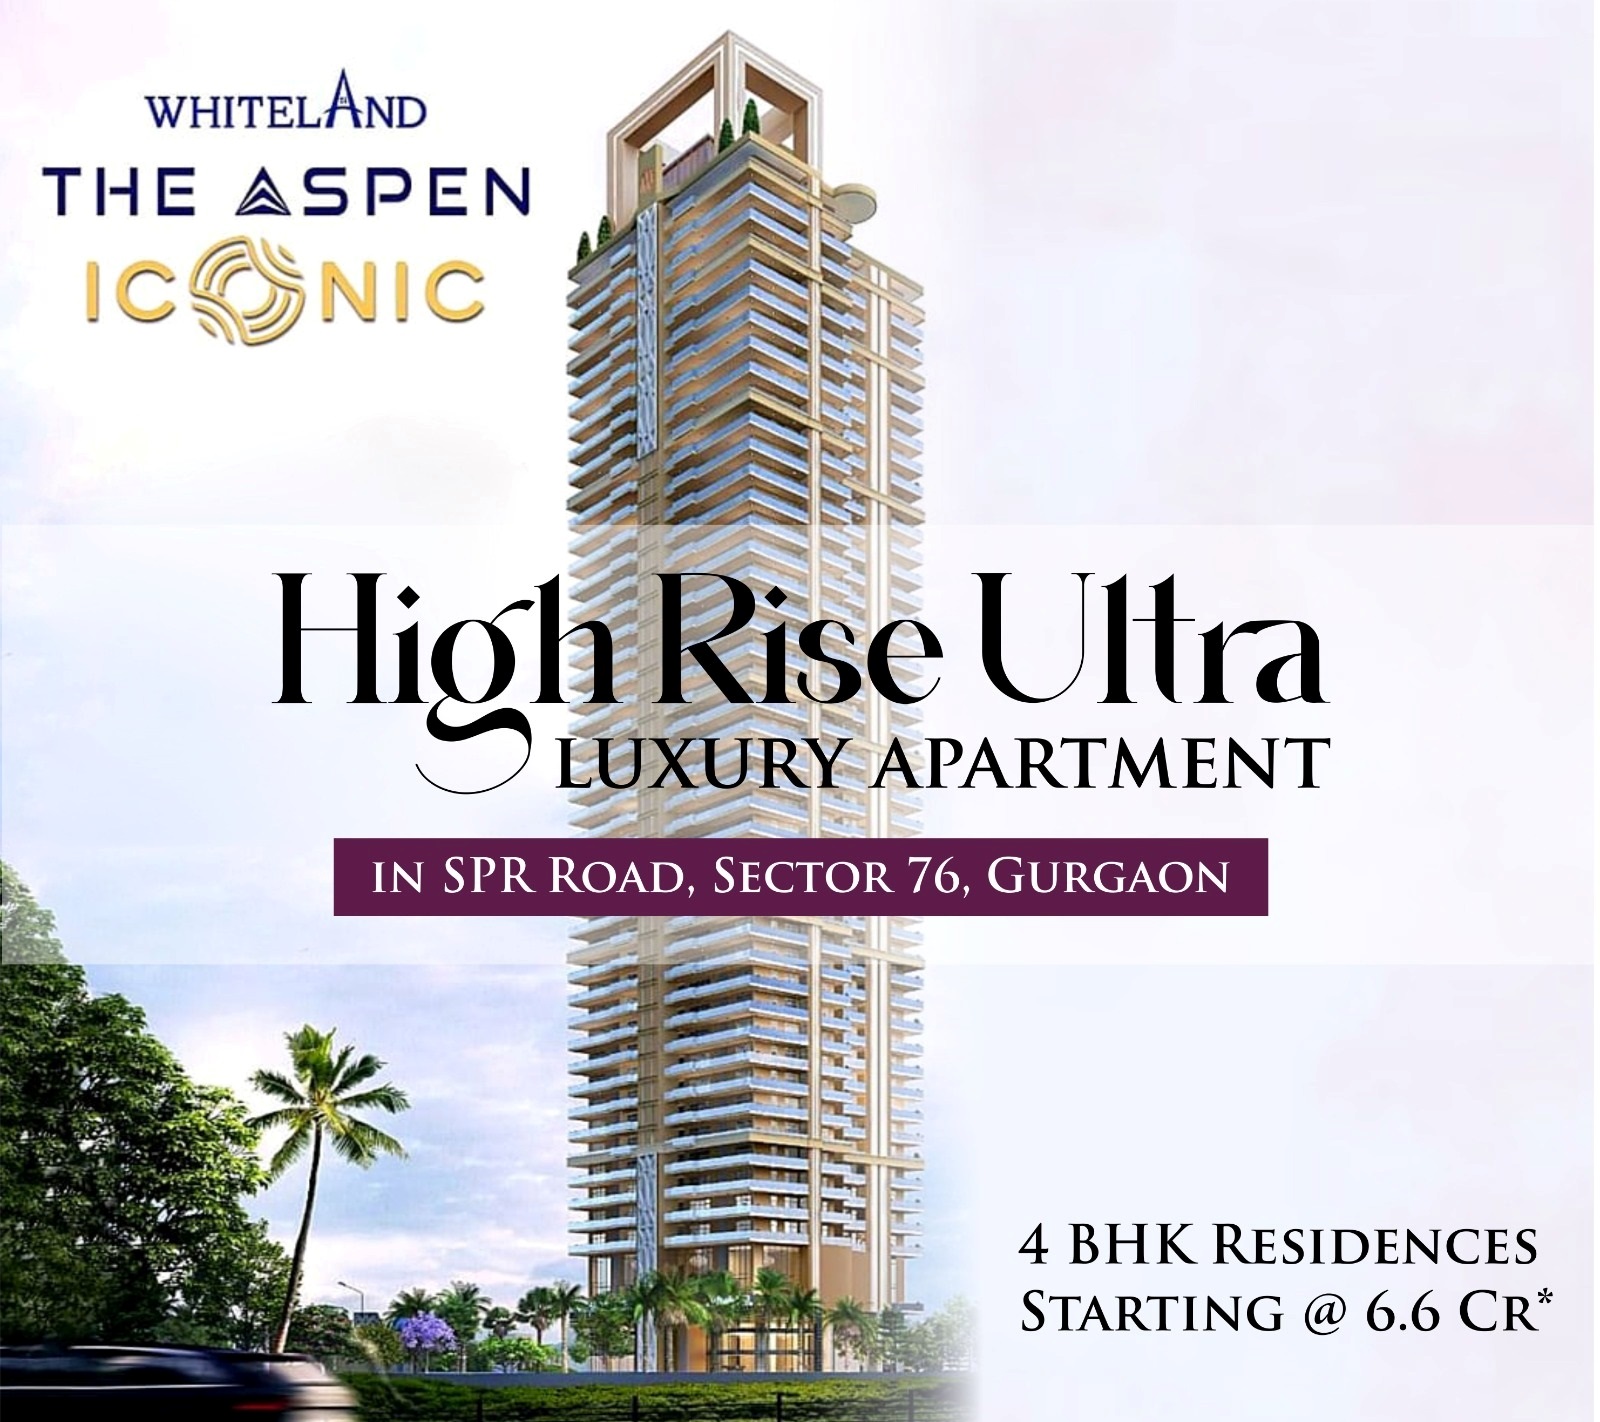 Book 4 BHK Residences starting Rs 6.6 Cr at Whiteland The Aspen in Sector 76, Gurgaon Update